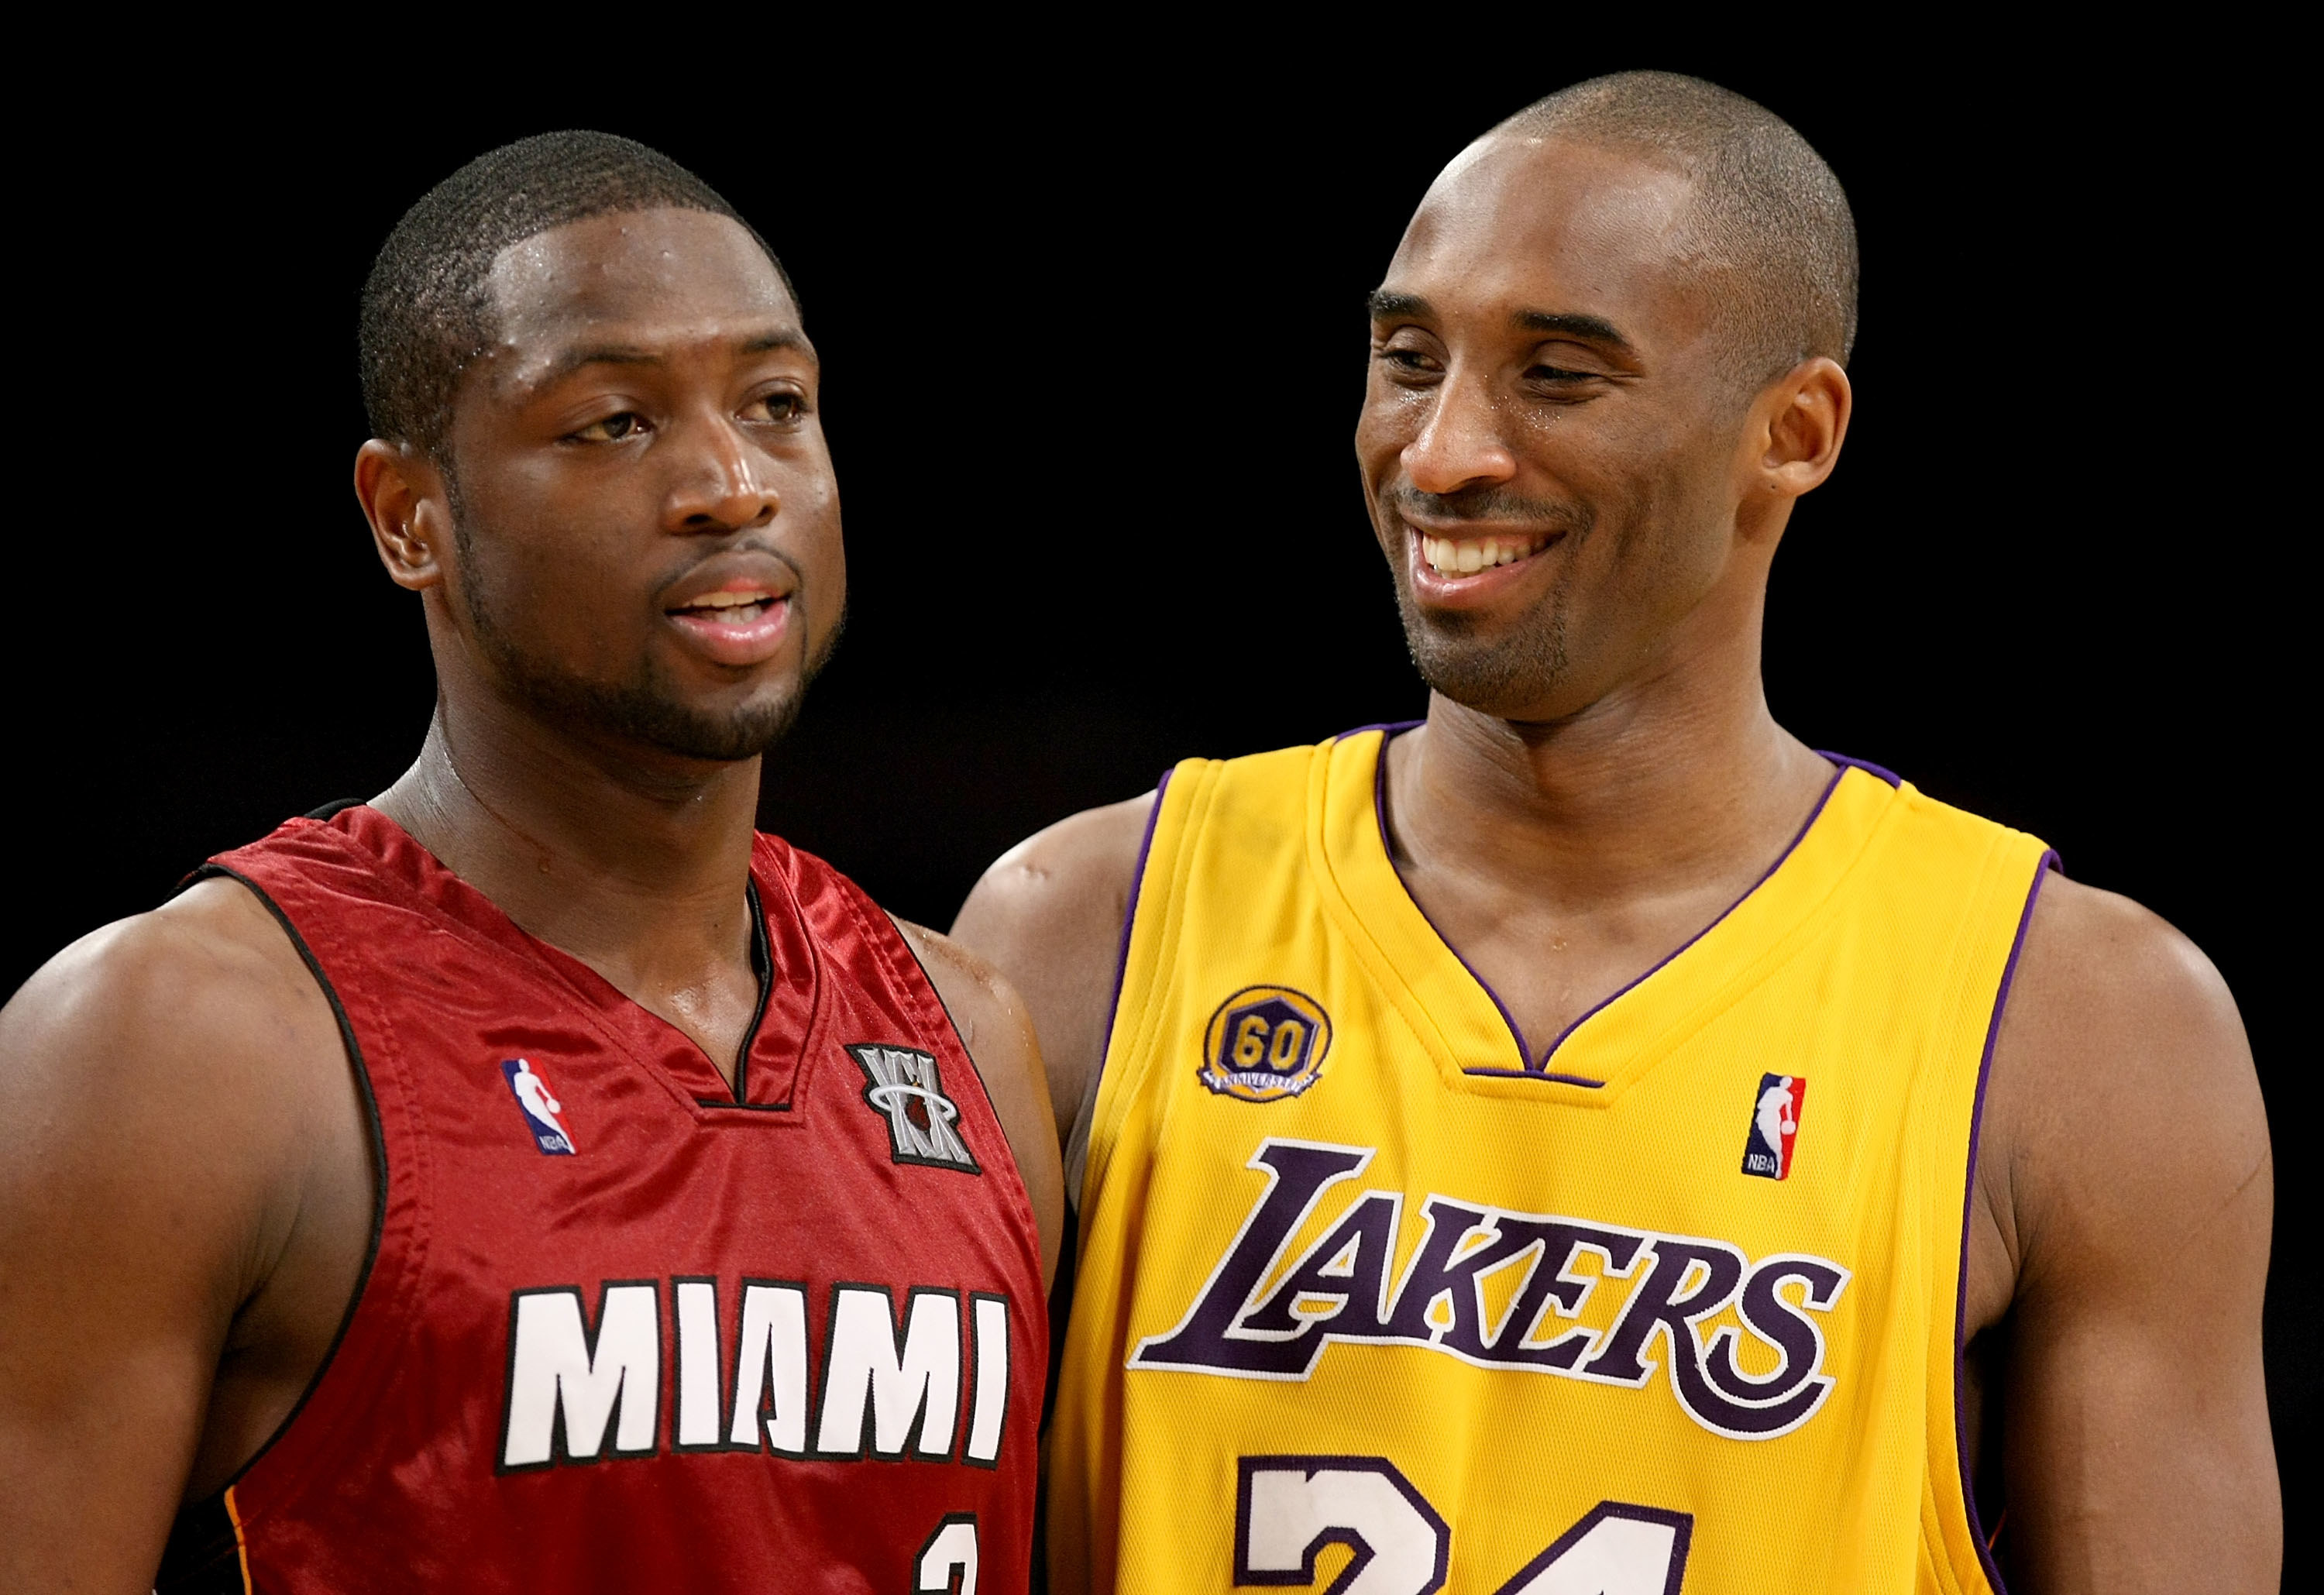 Bryant and Wade playing each other in basketball in 2008